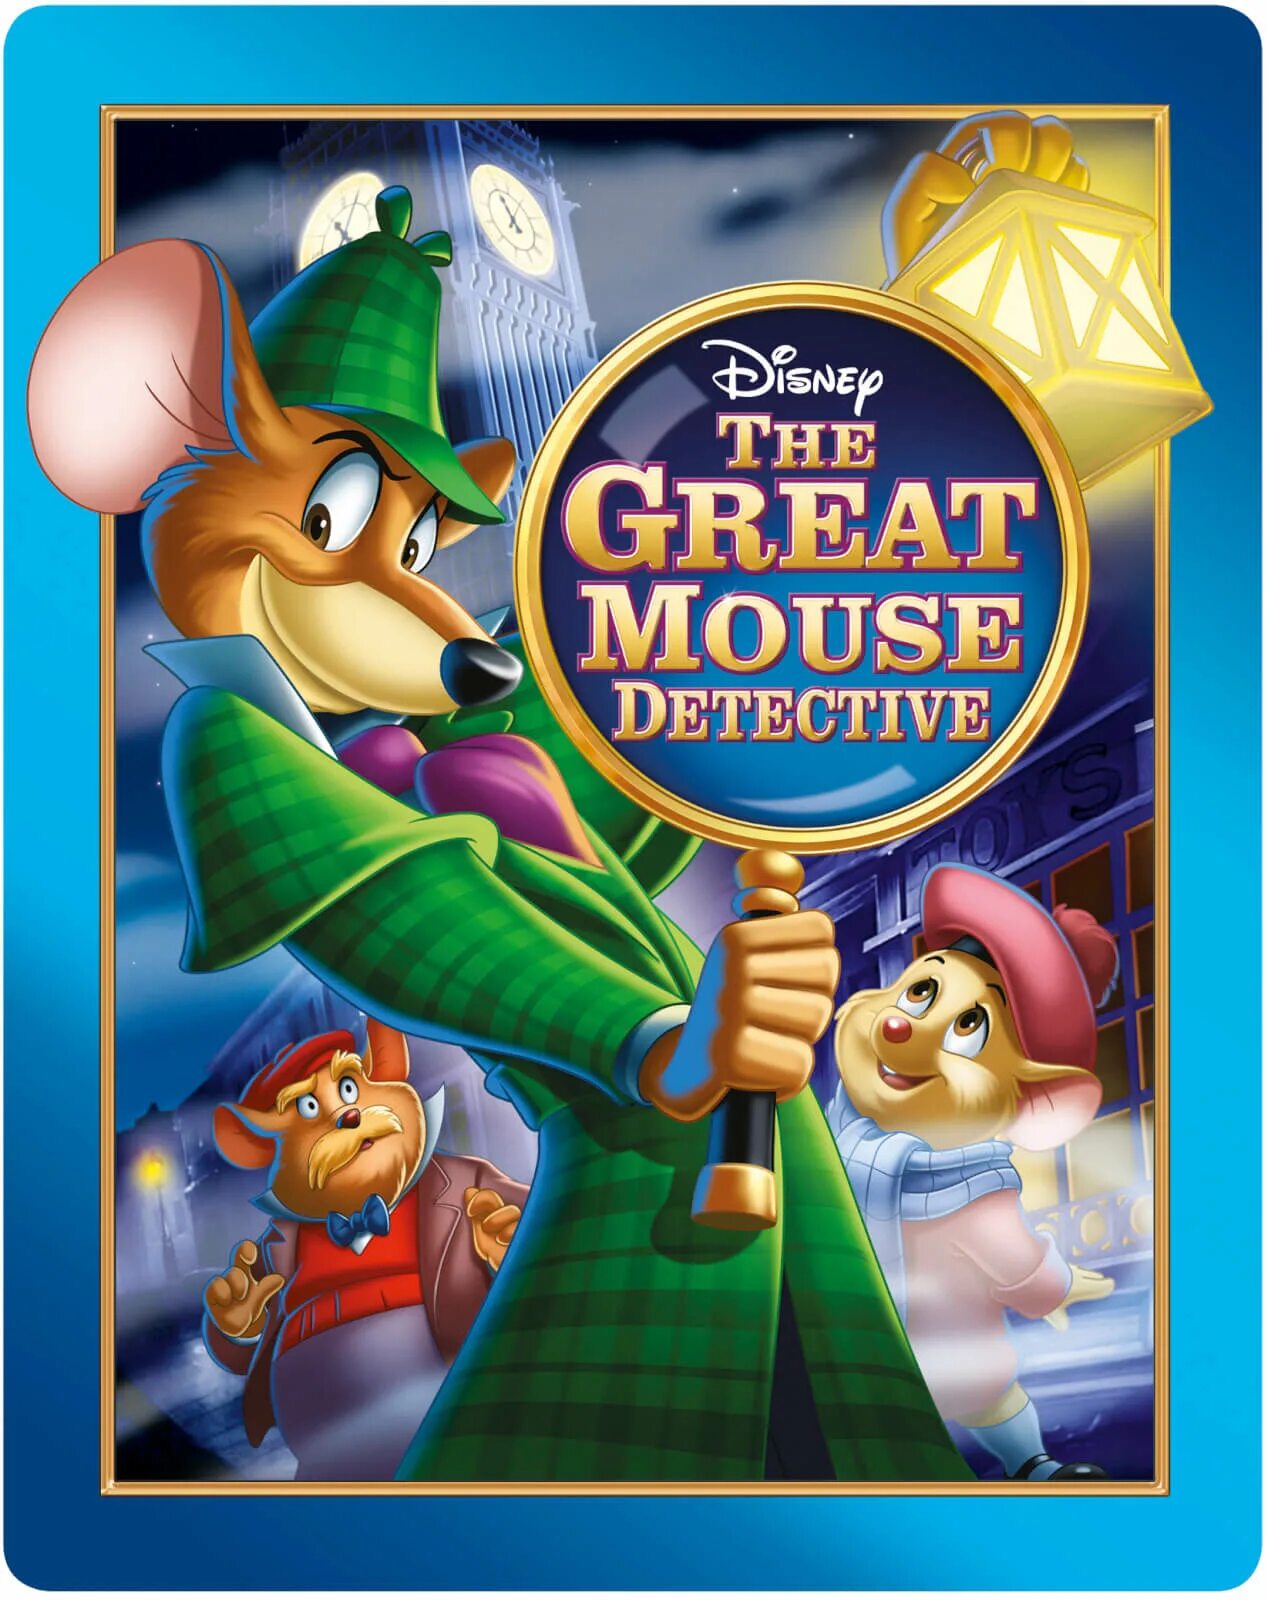 Great detectives. Basil the great Mouse Detective. The great Mouse Detective books. Great Mouse Detective background. The great Mouse Detective Funko Pop.